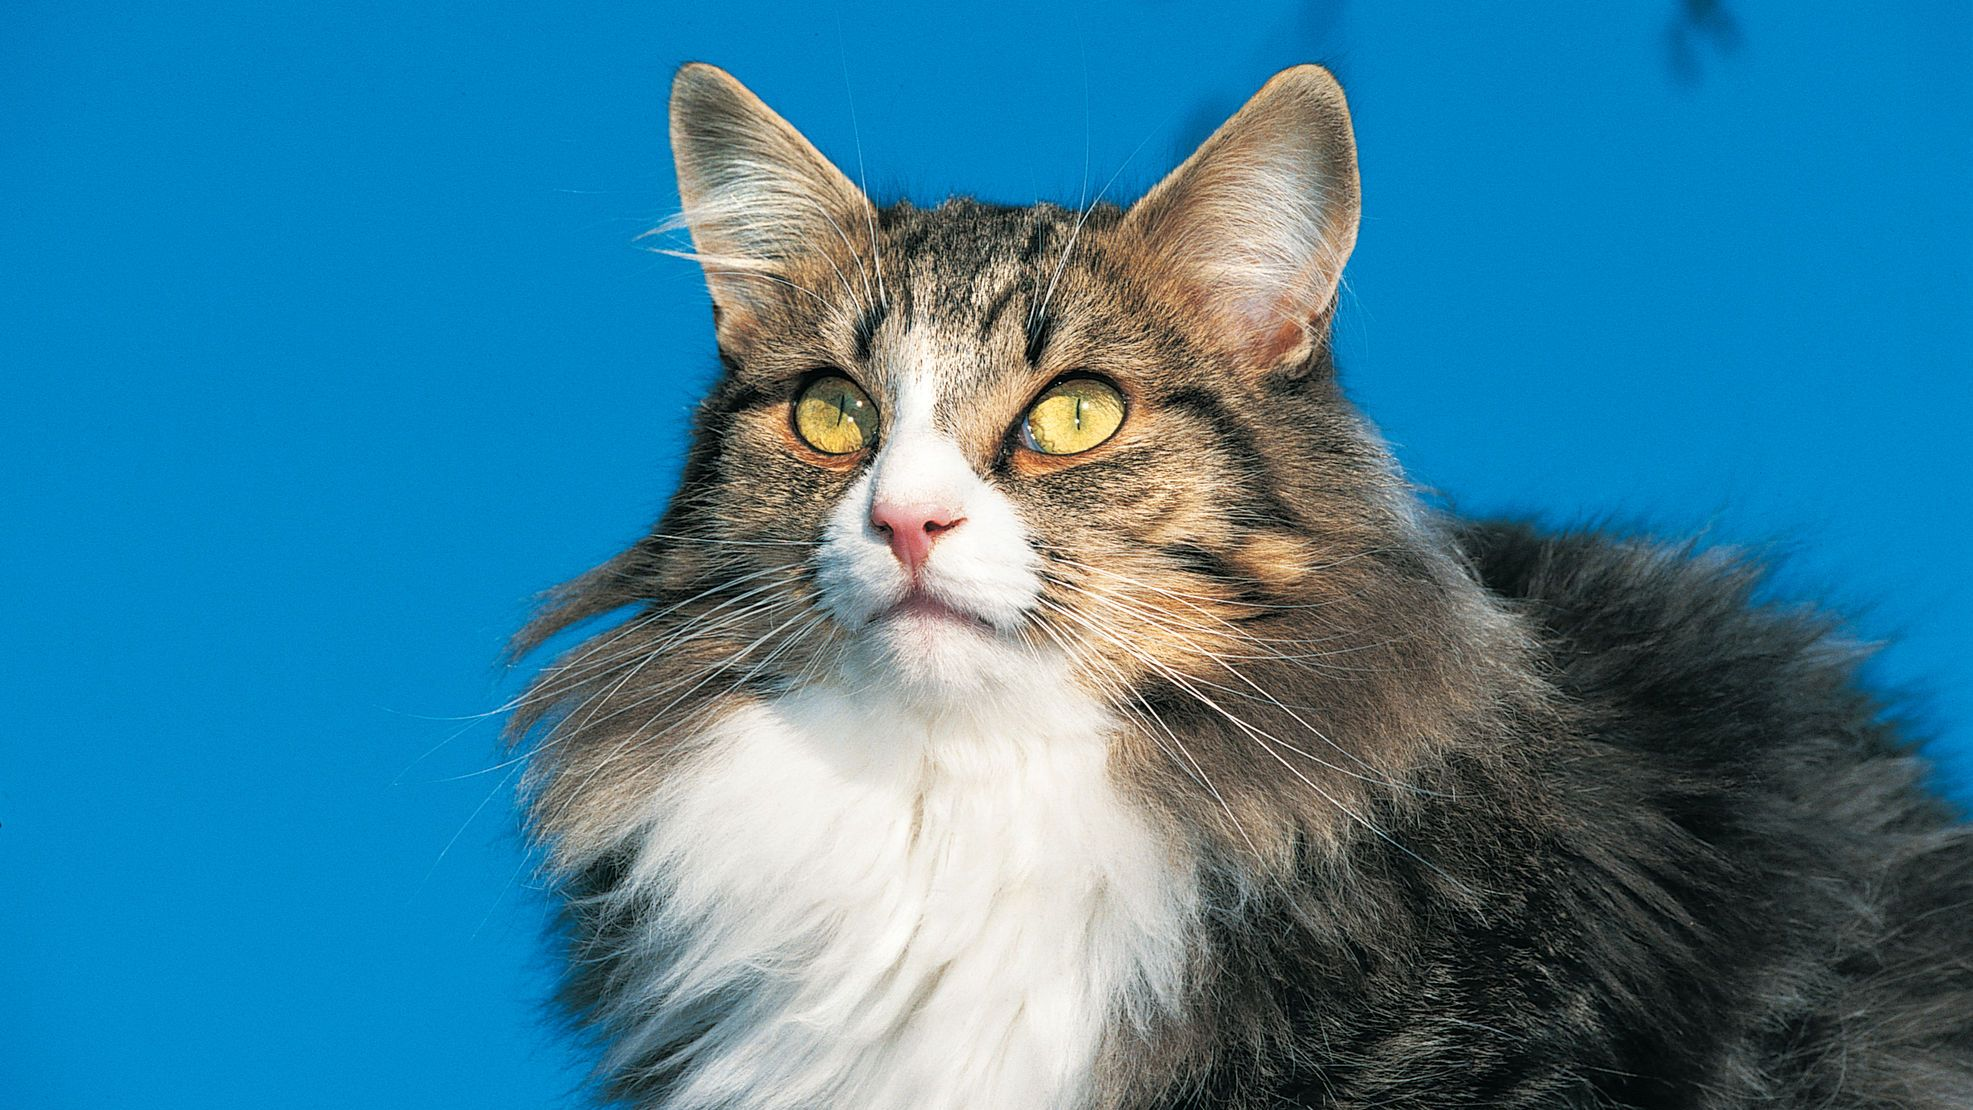 Close-up of Norwegian Forest Cat in front of blue sky background